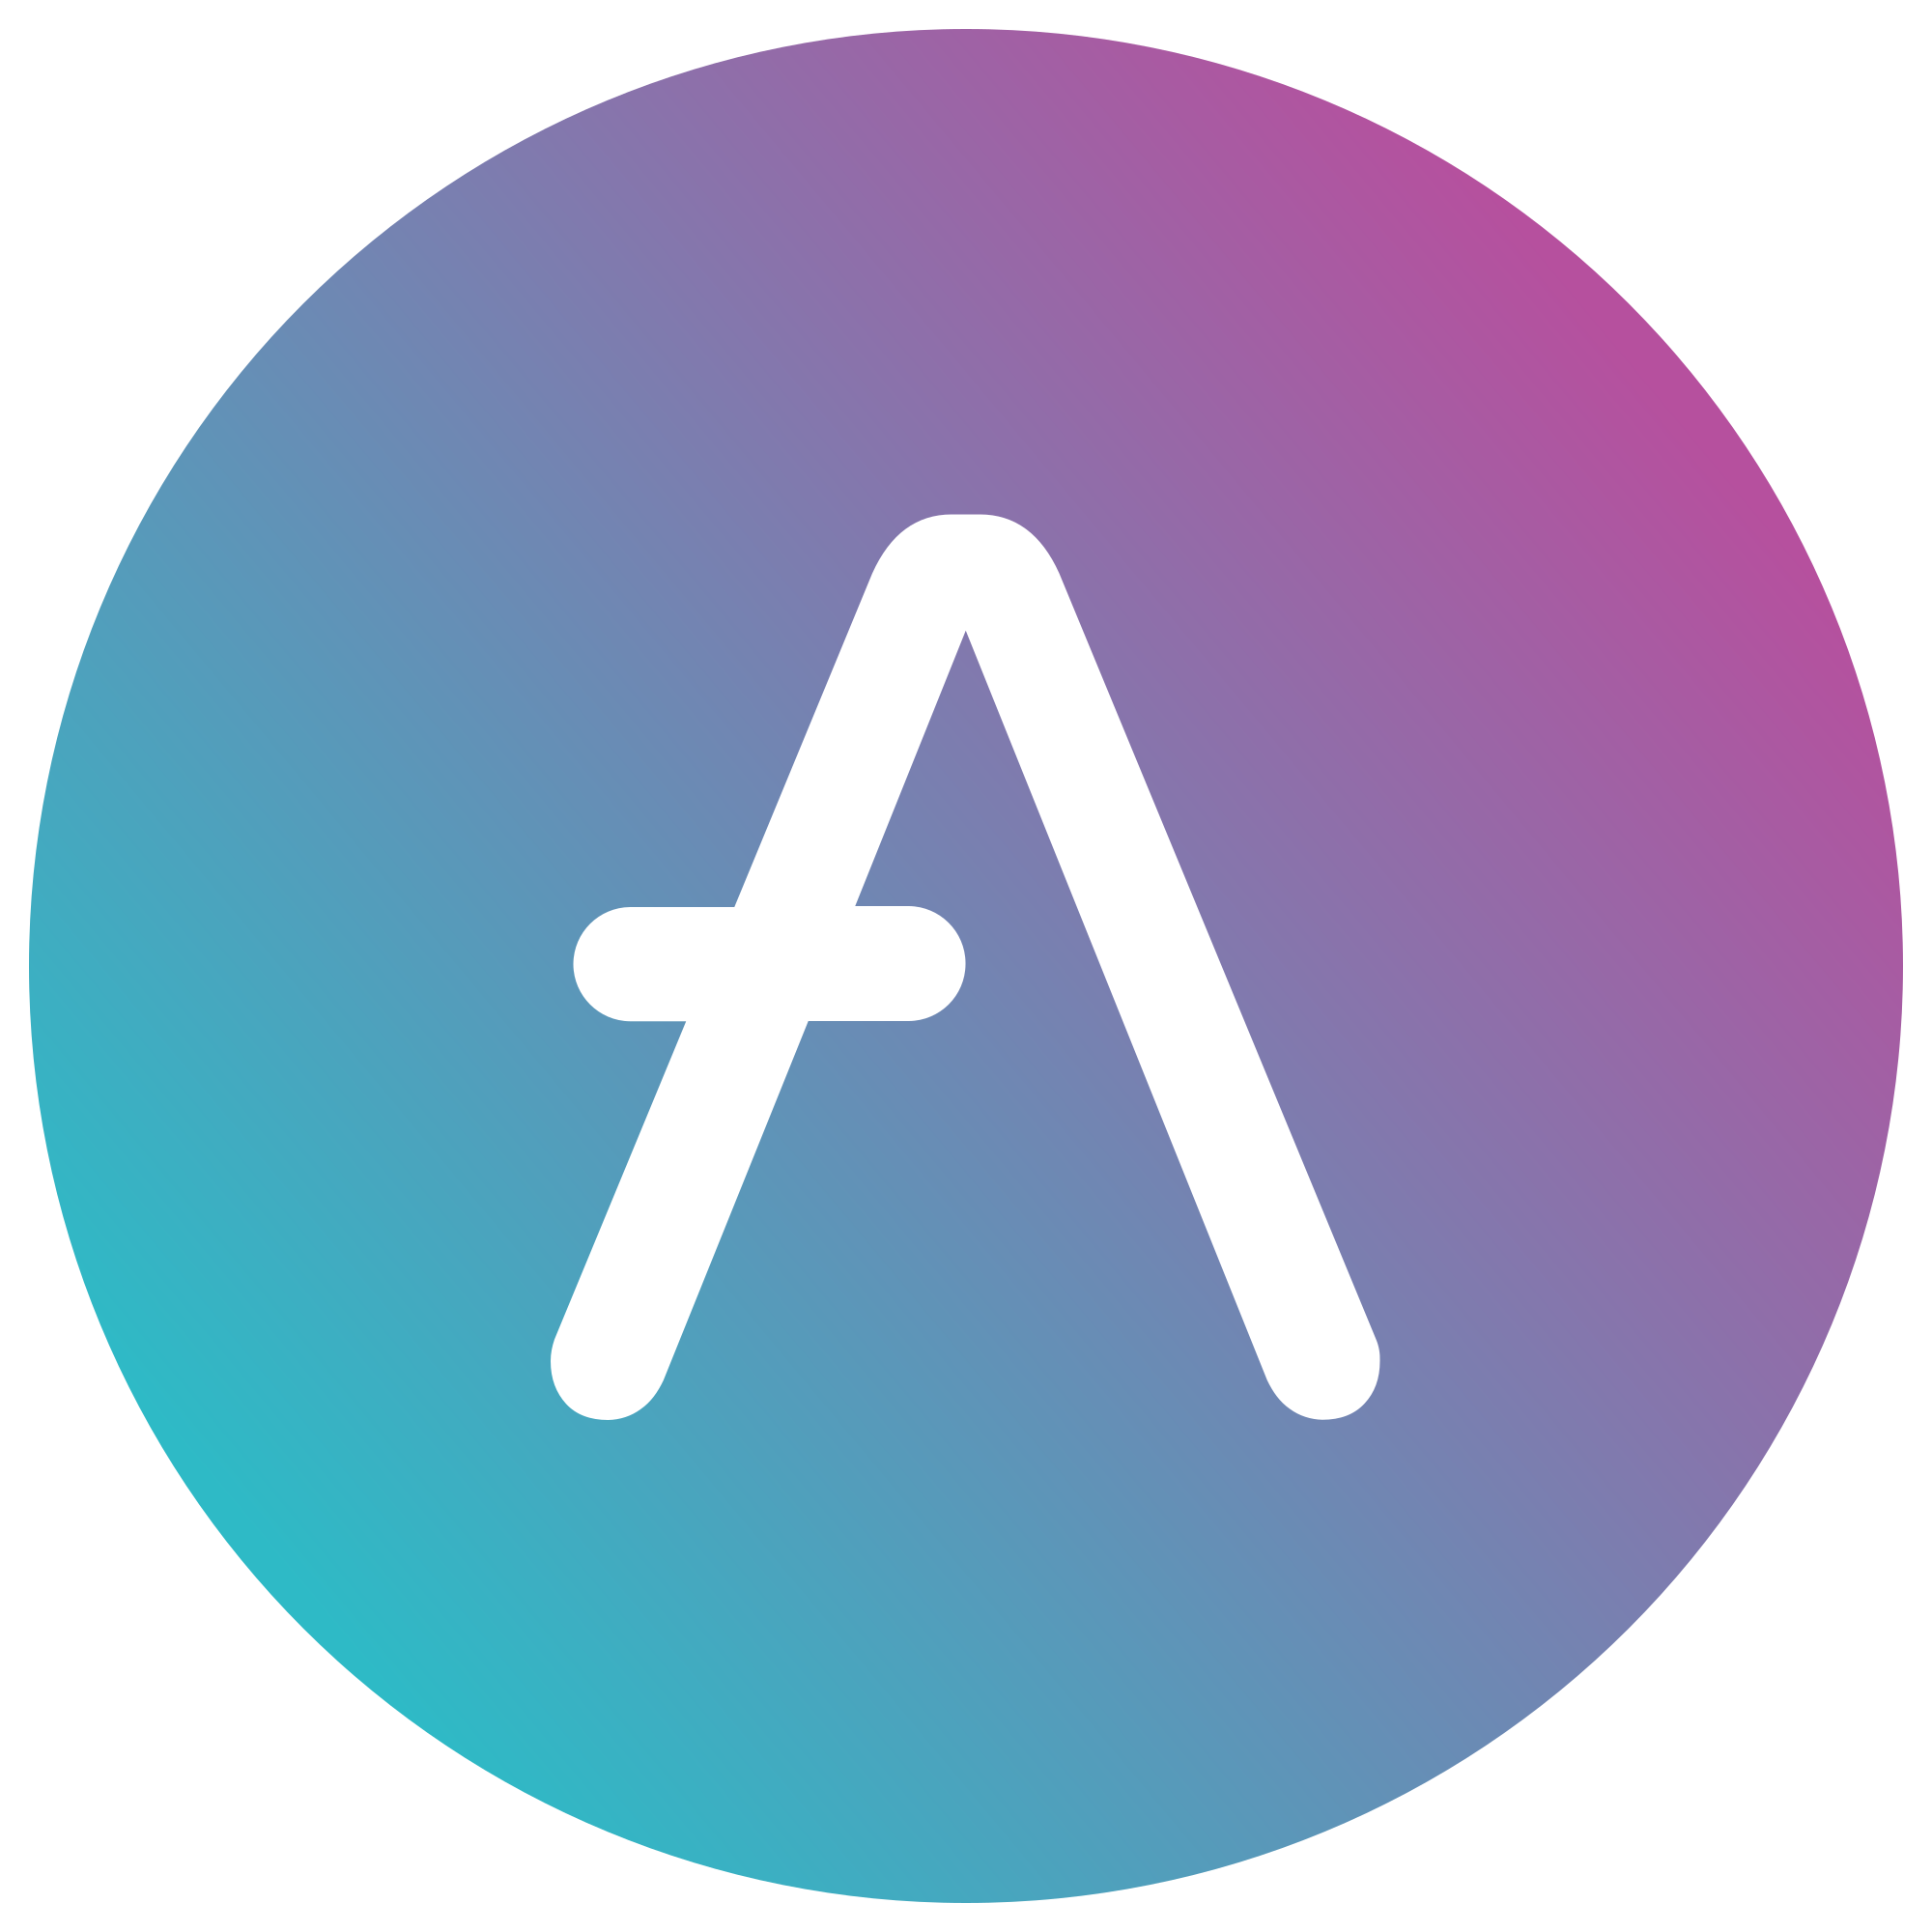 Aave: Earn interest, borrow assets, and build applications